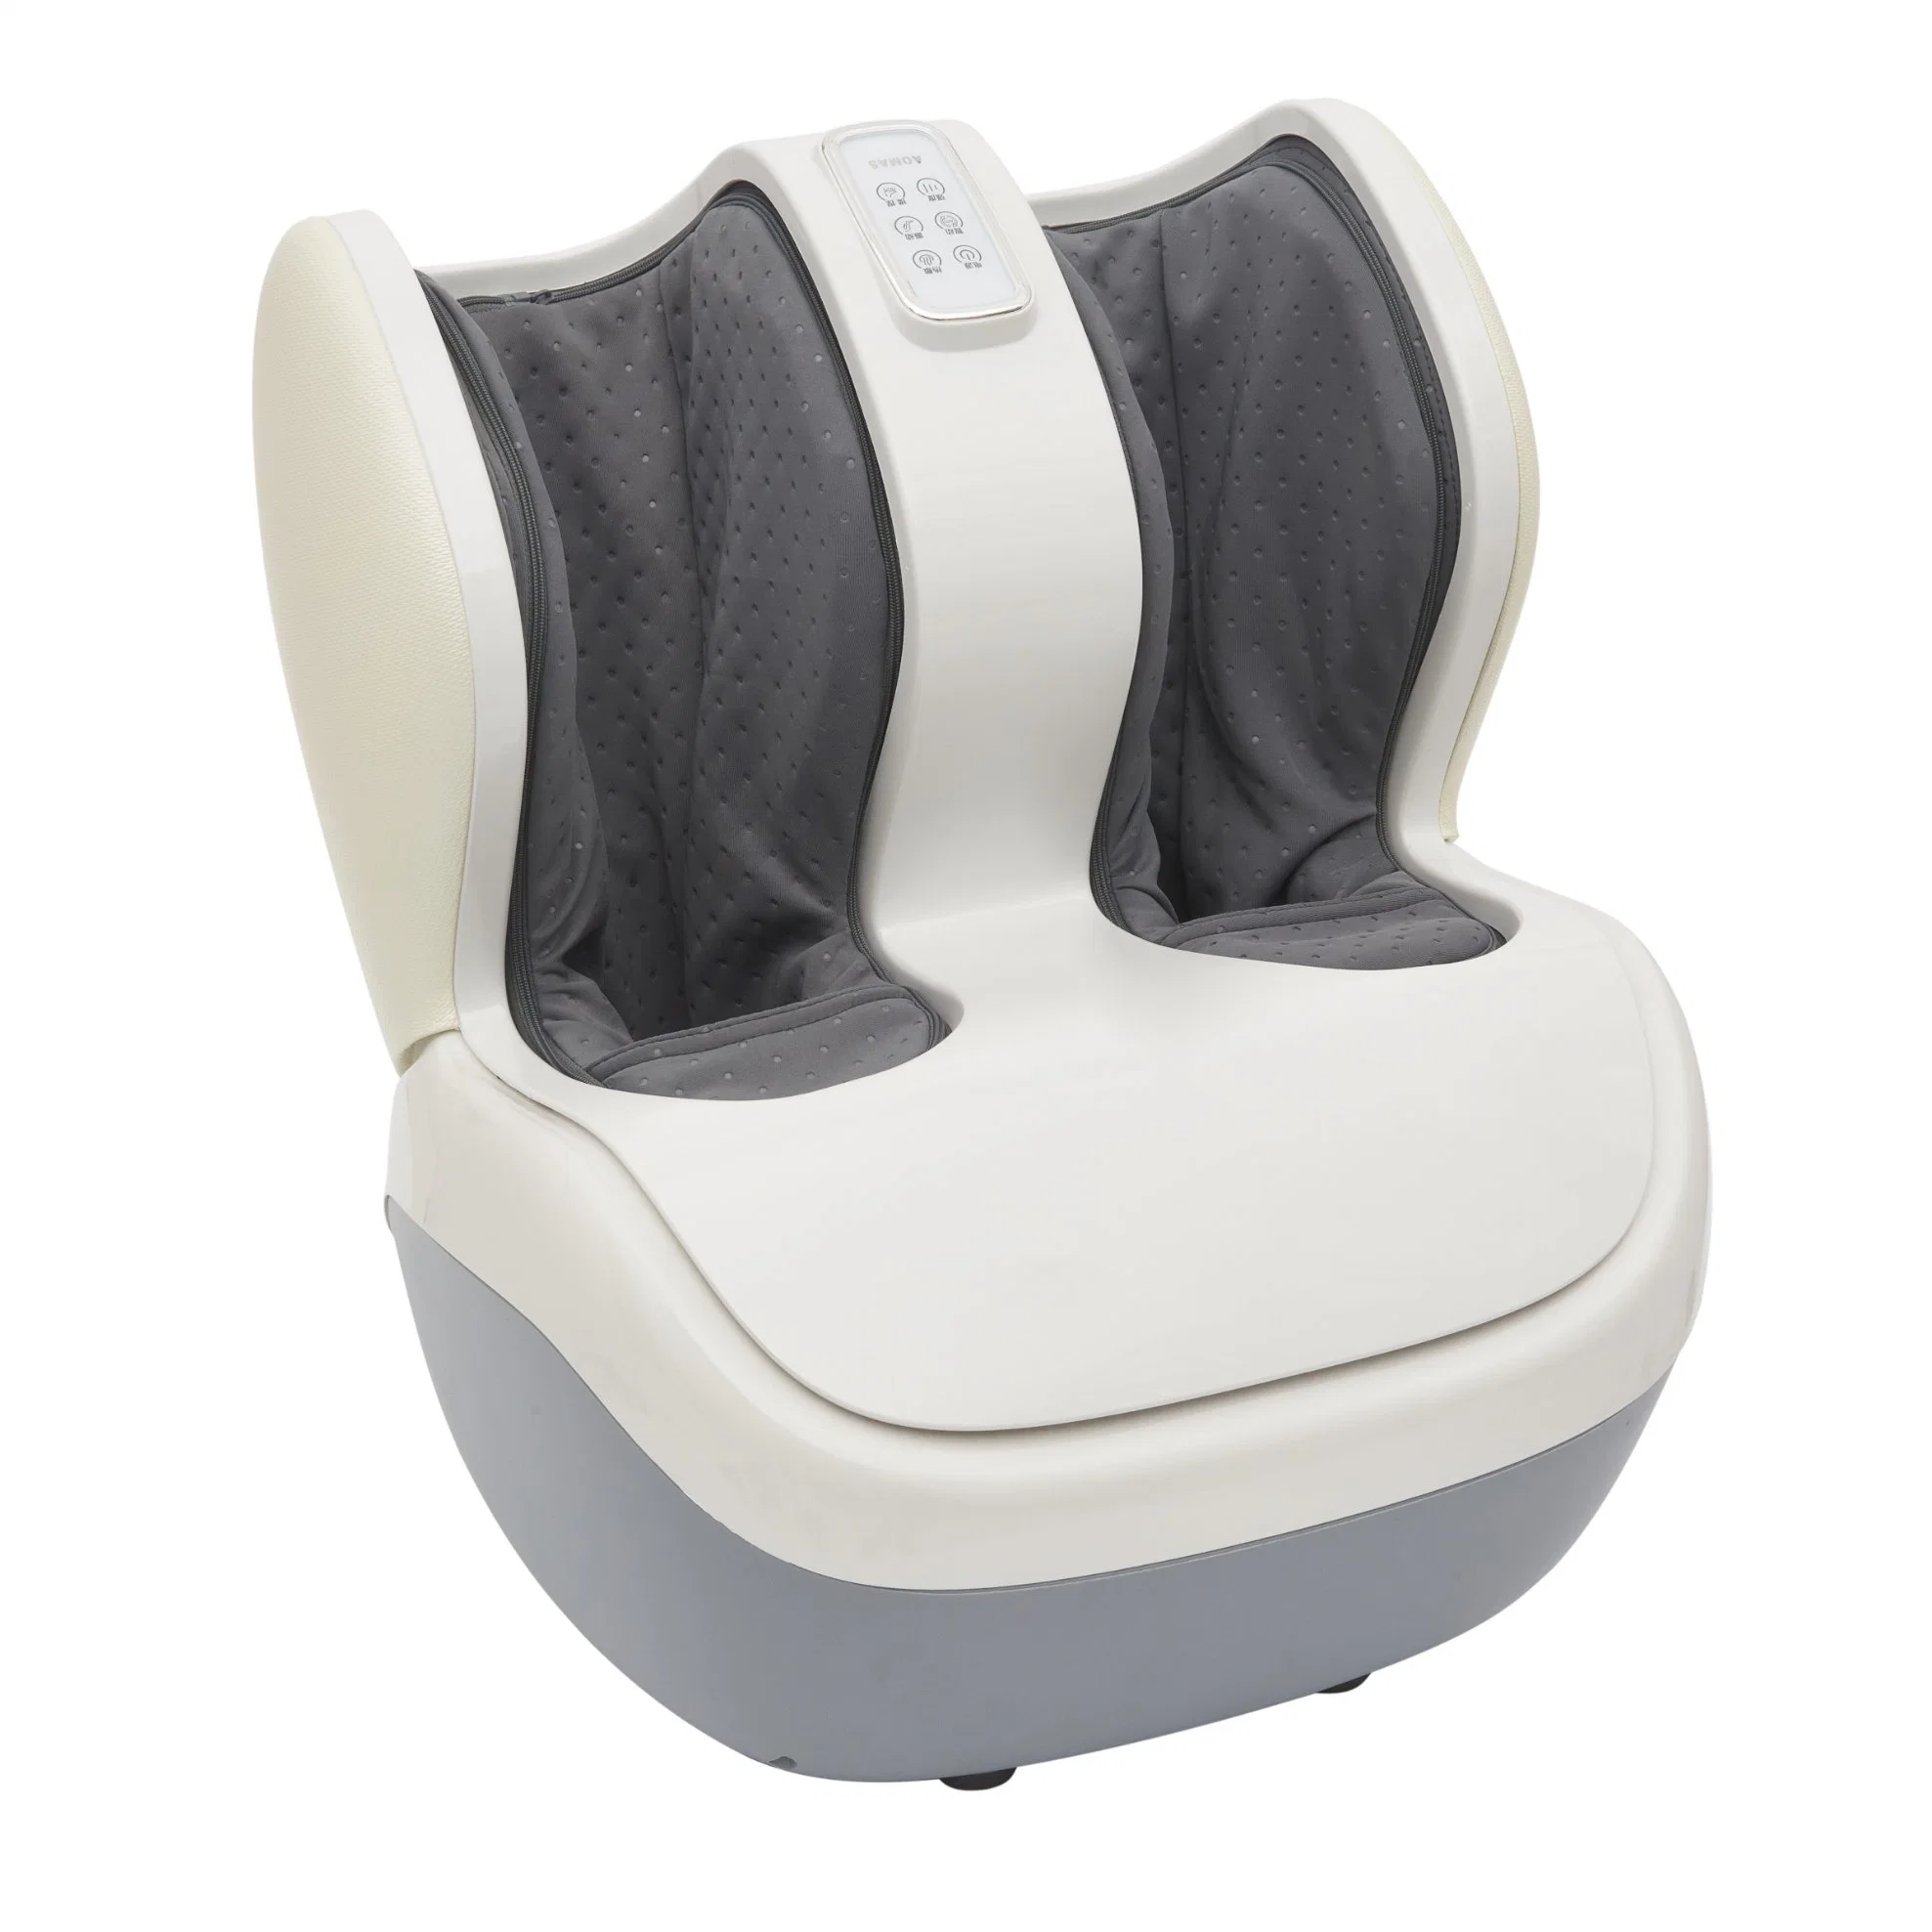 Leg Massager for Pain Relief in Foot & Calf with Human Hands Like Pressing, Heat, Vibration & Reflexology Rollers